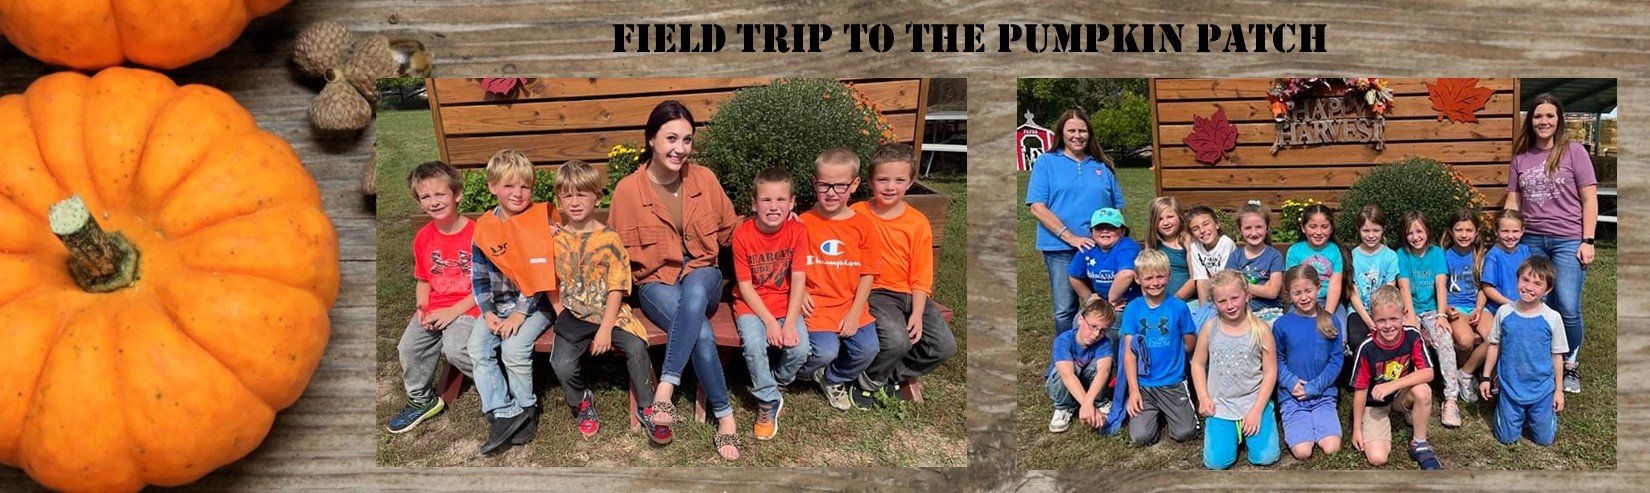 images of students at pumpkin patch